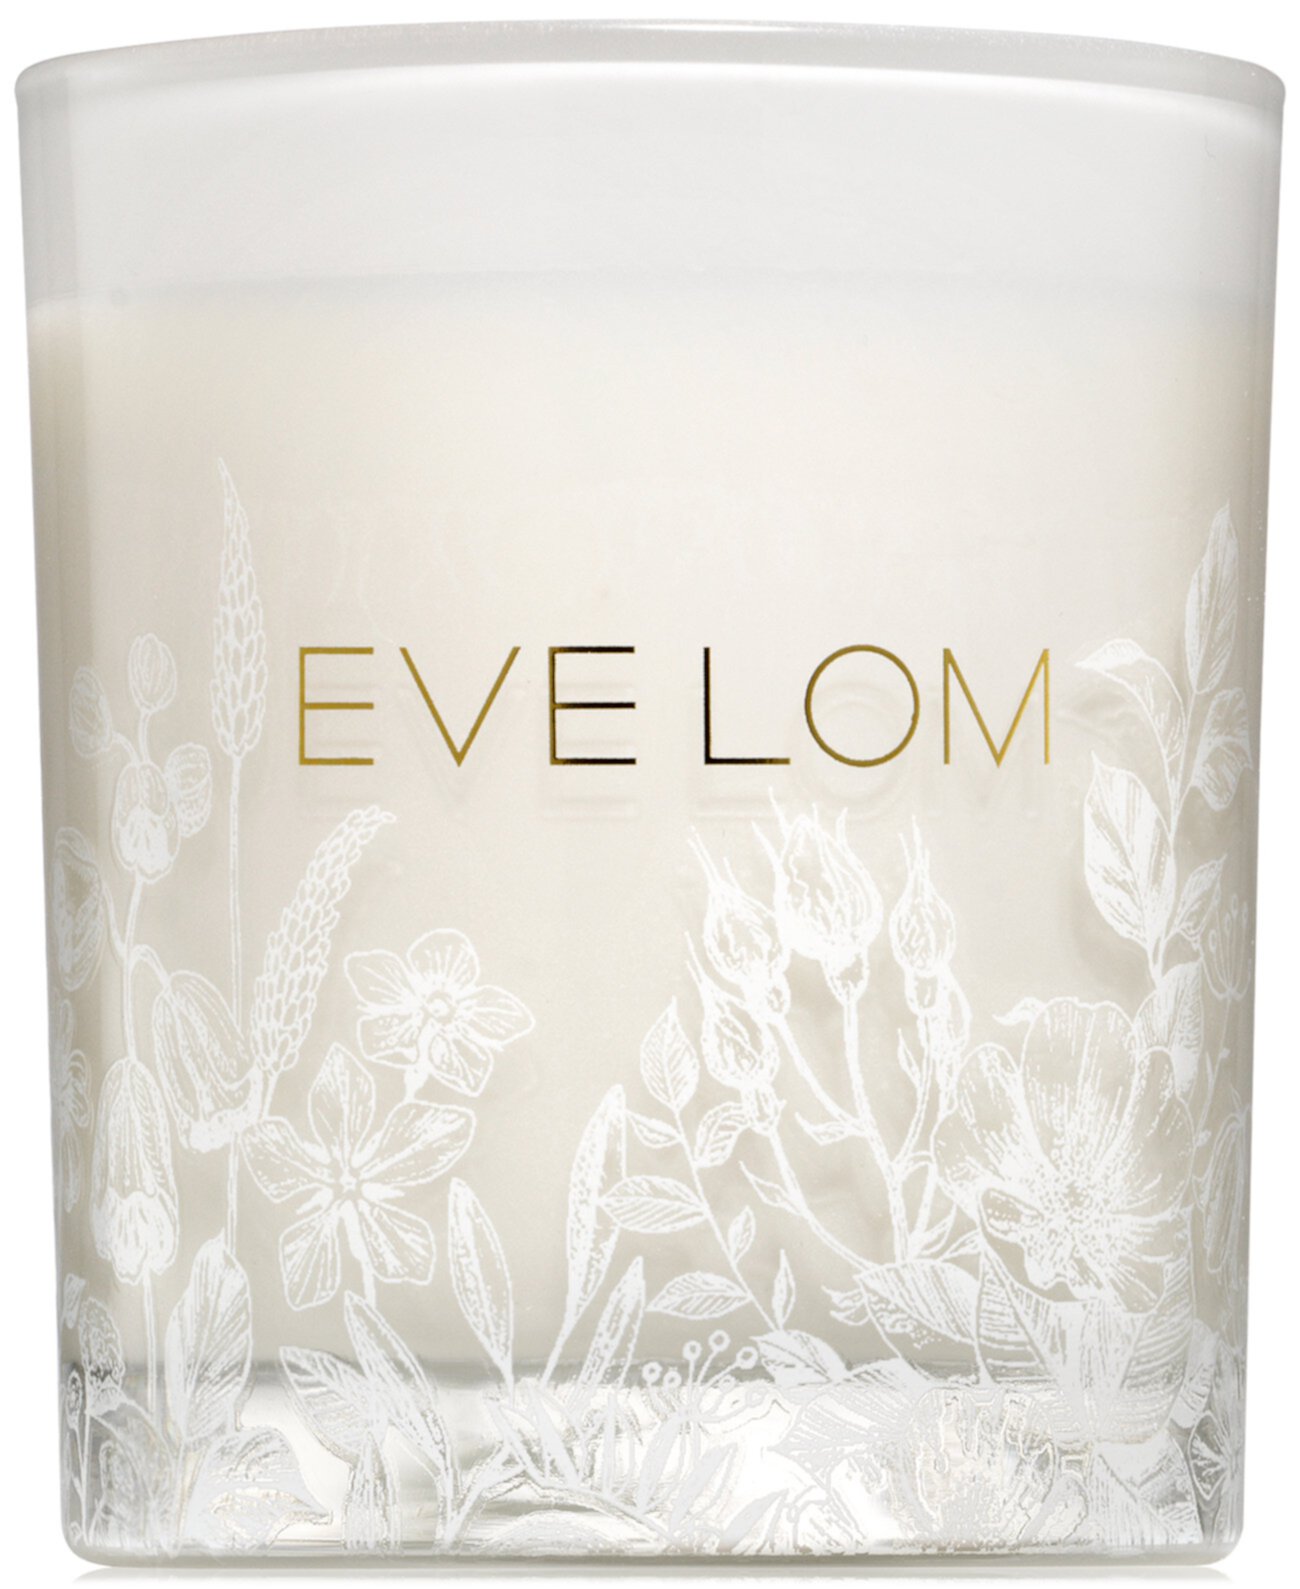 Blooming Fountain Scented Candle, 6.5 oz. Eve Lom